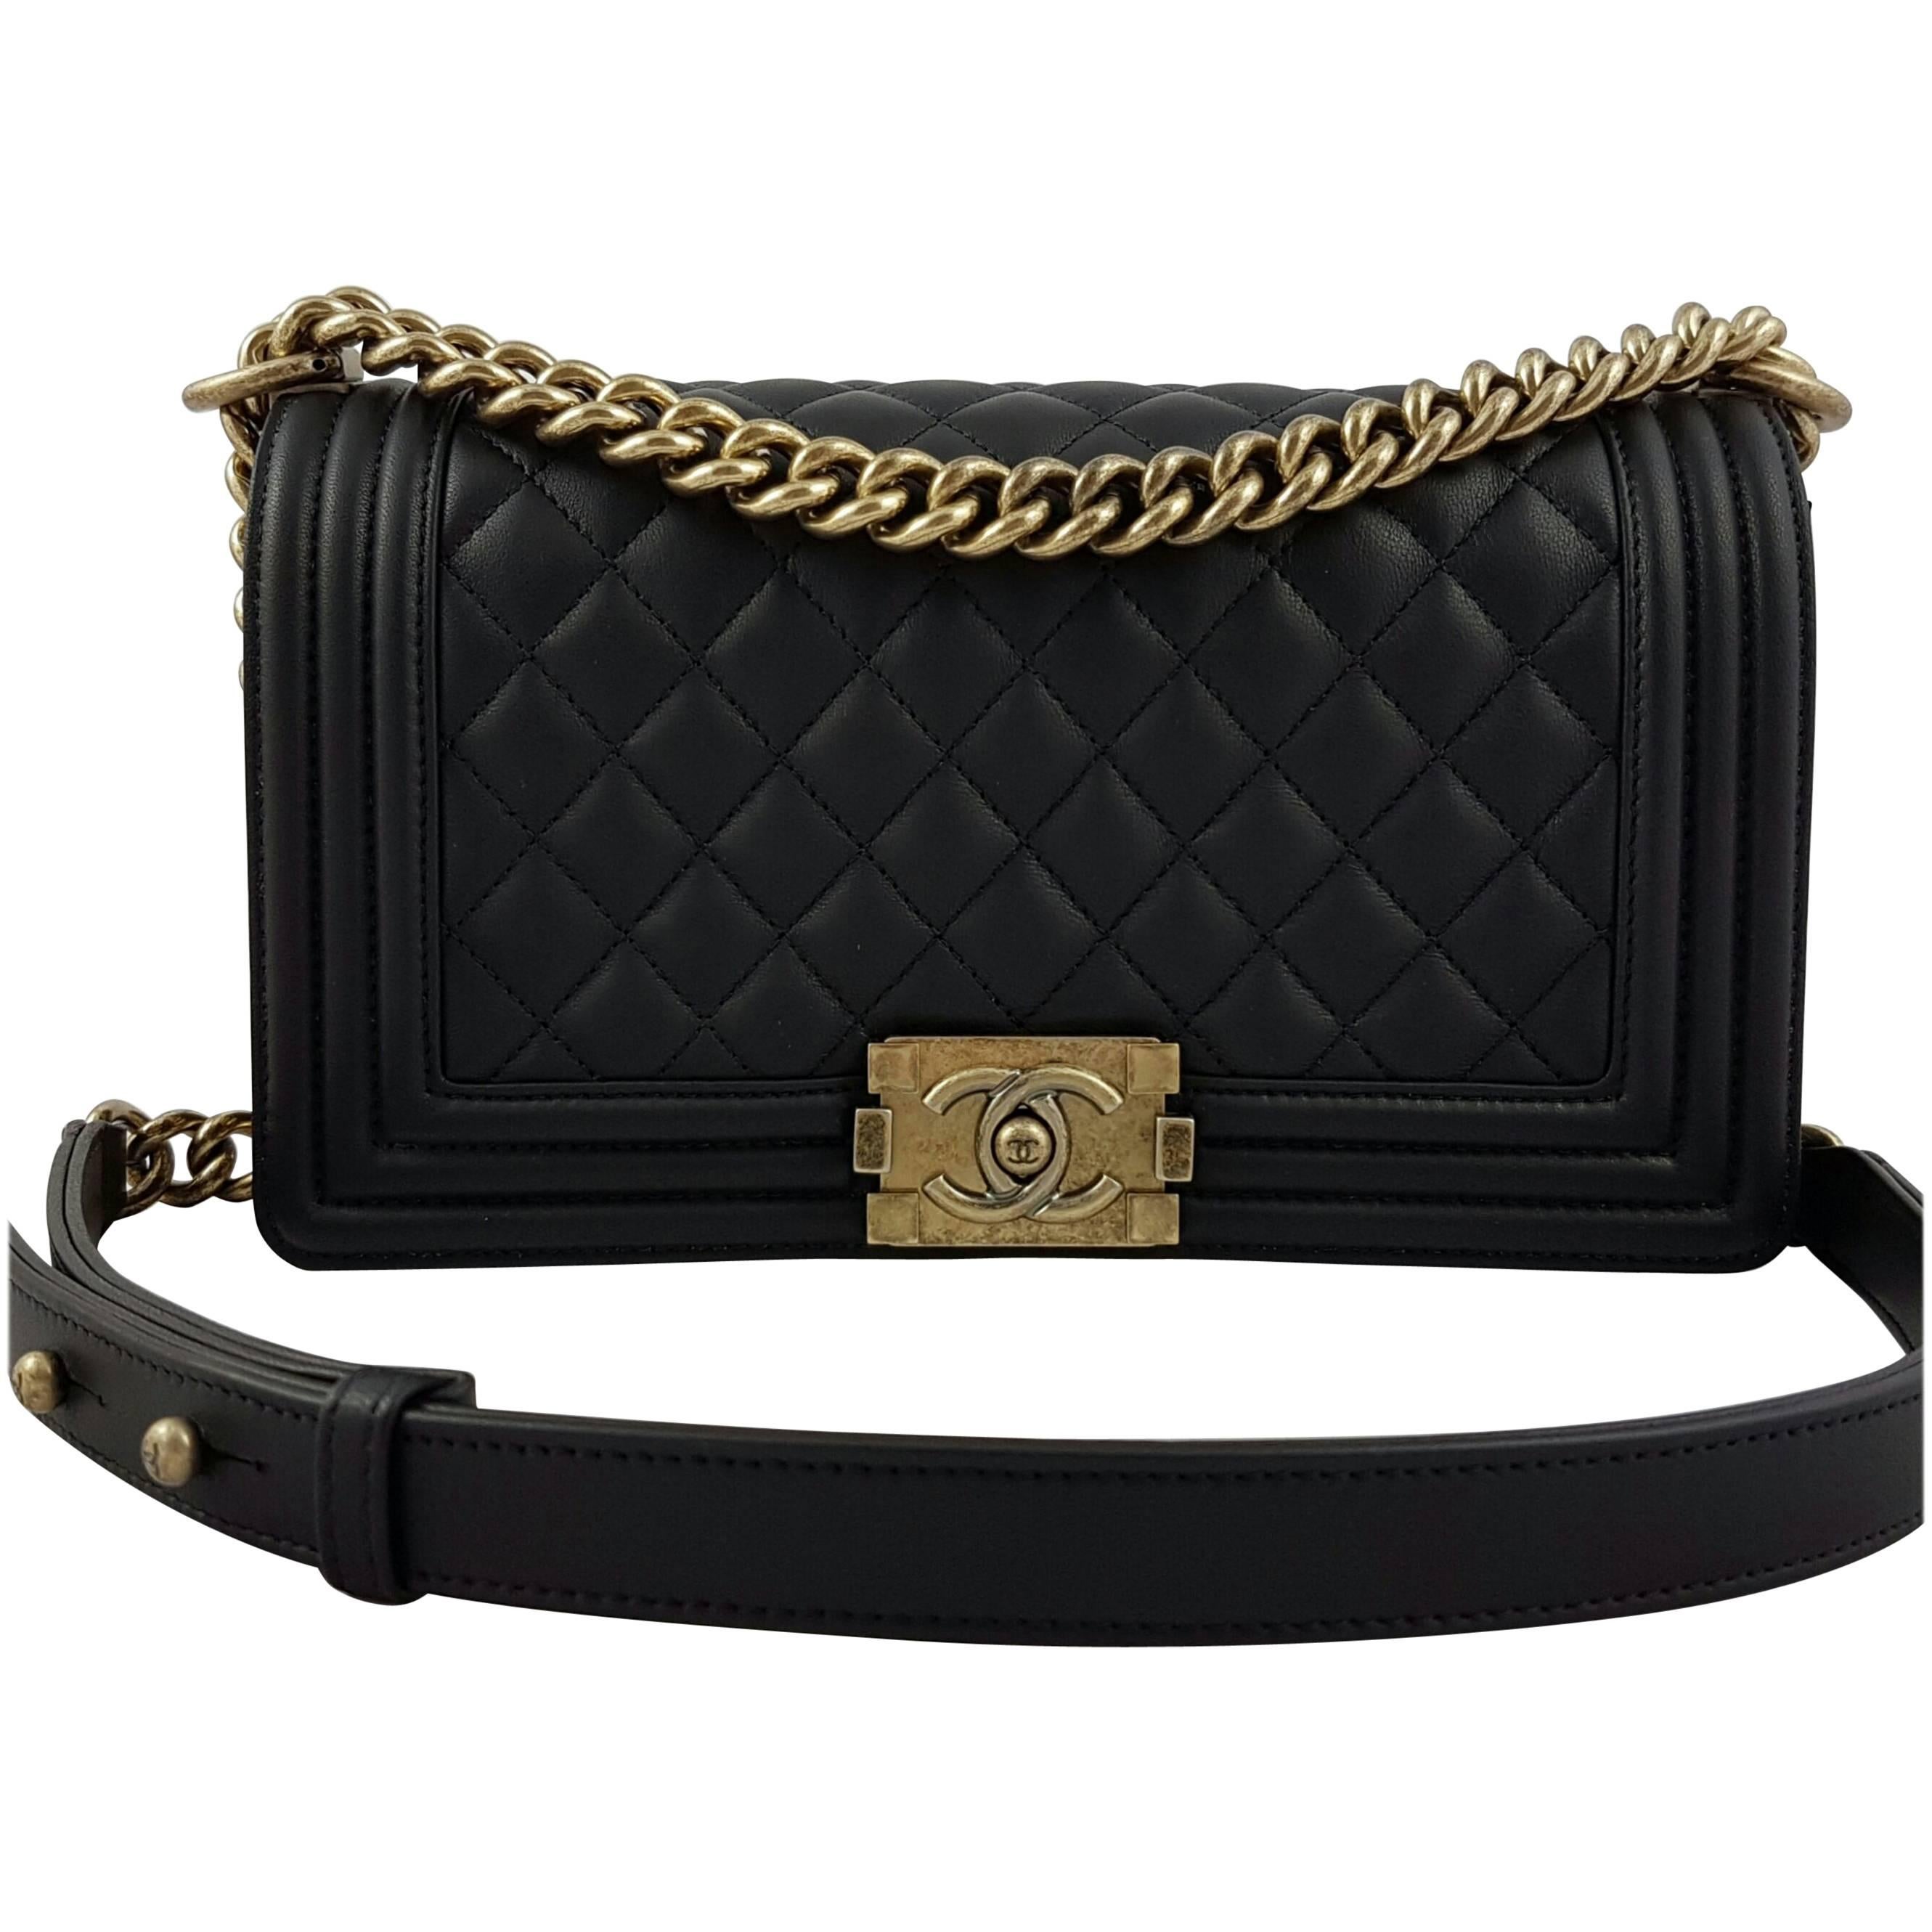 Chanel Medium Boy Bag Quilted Leather - Black with Gold Hardware